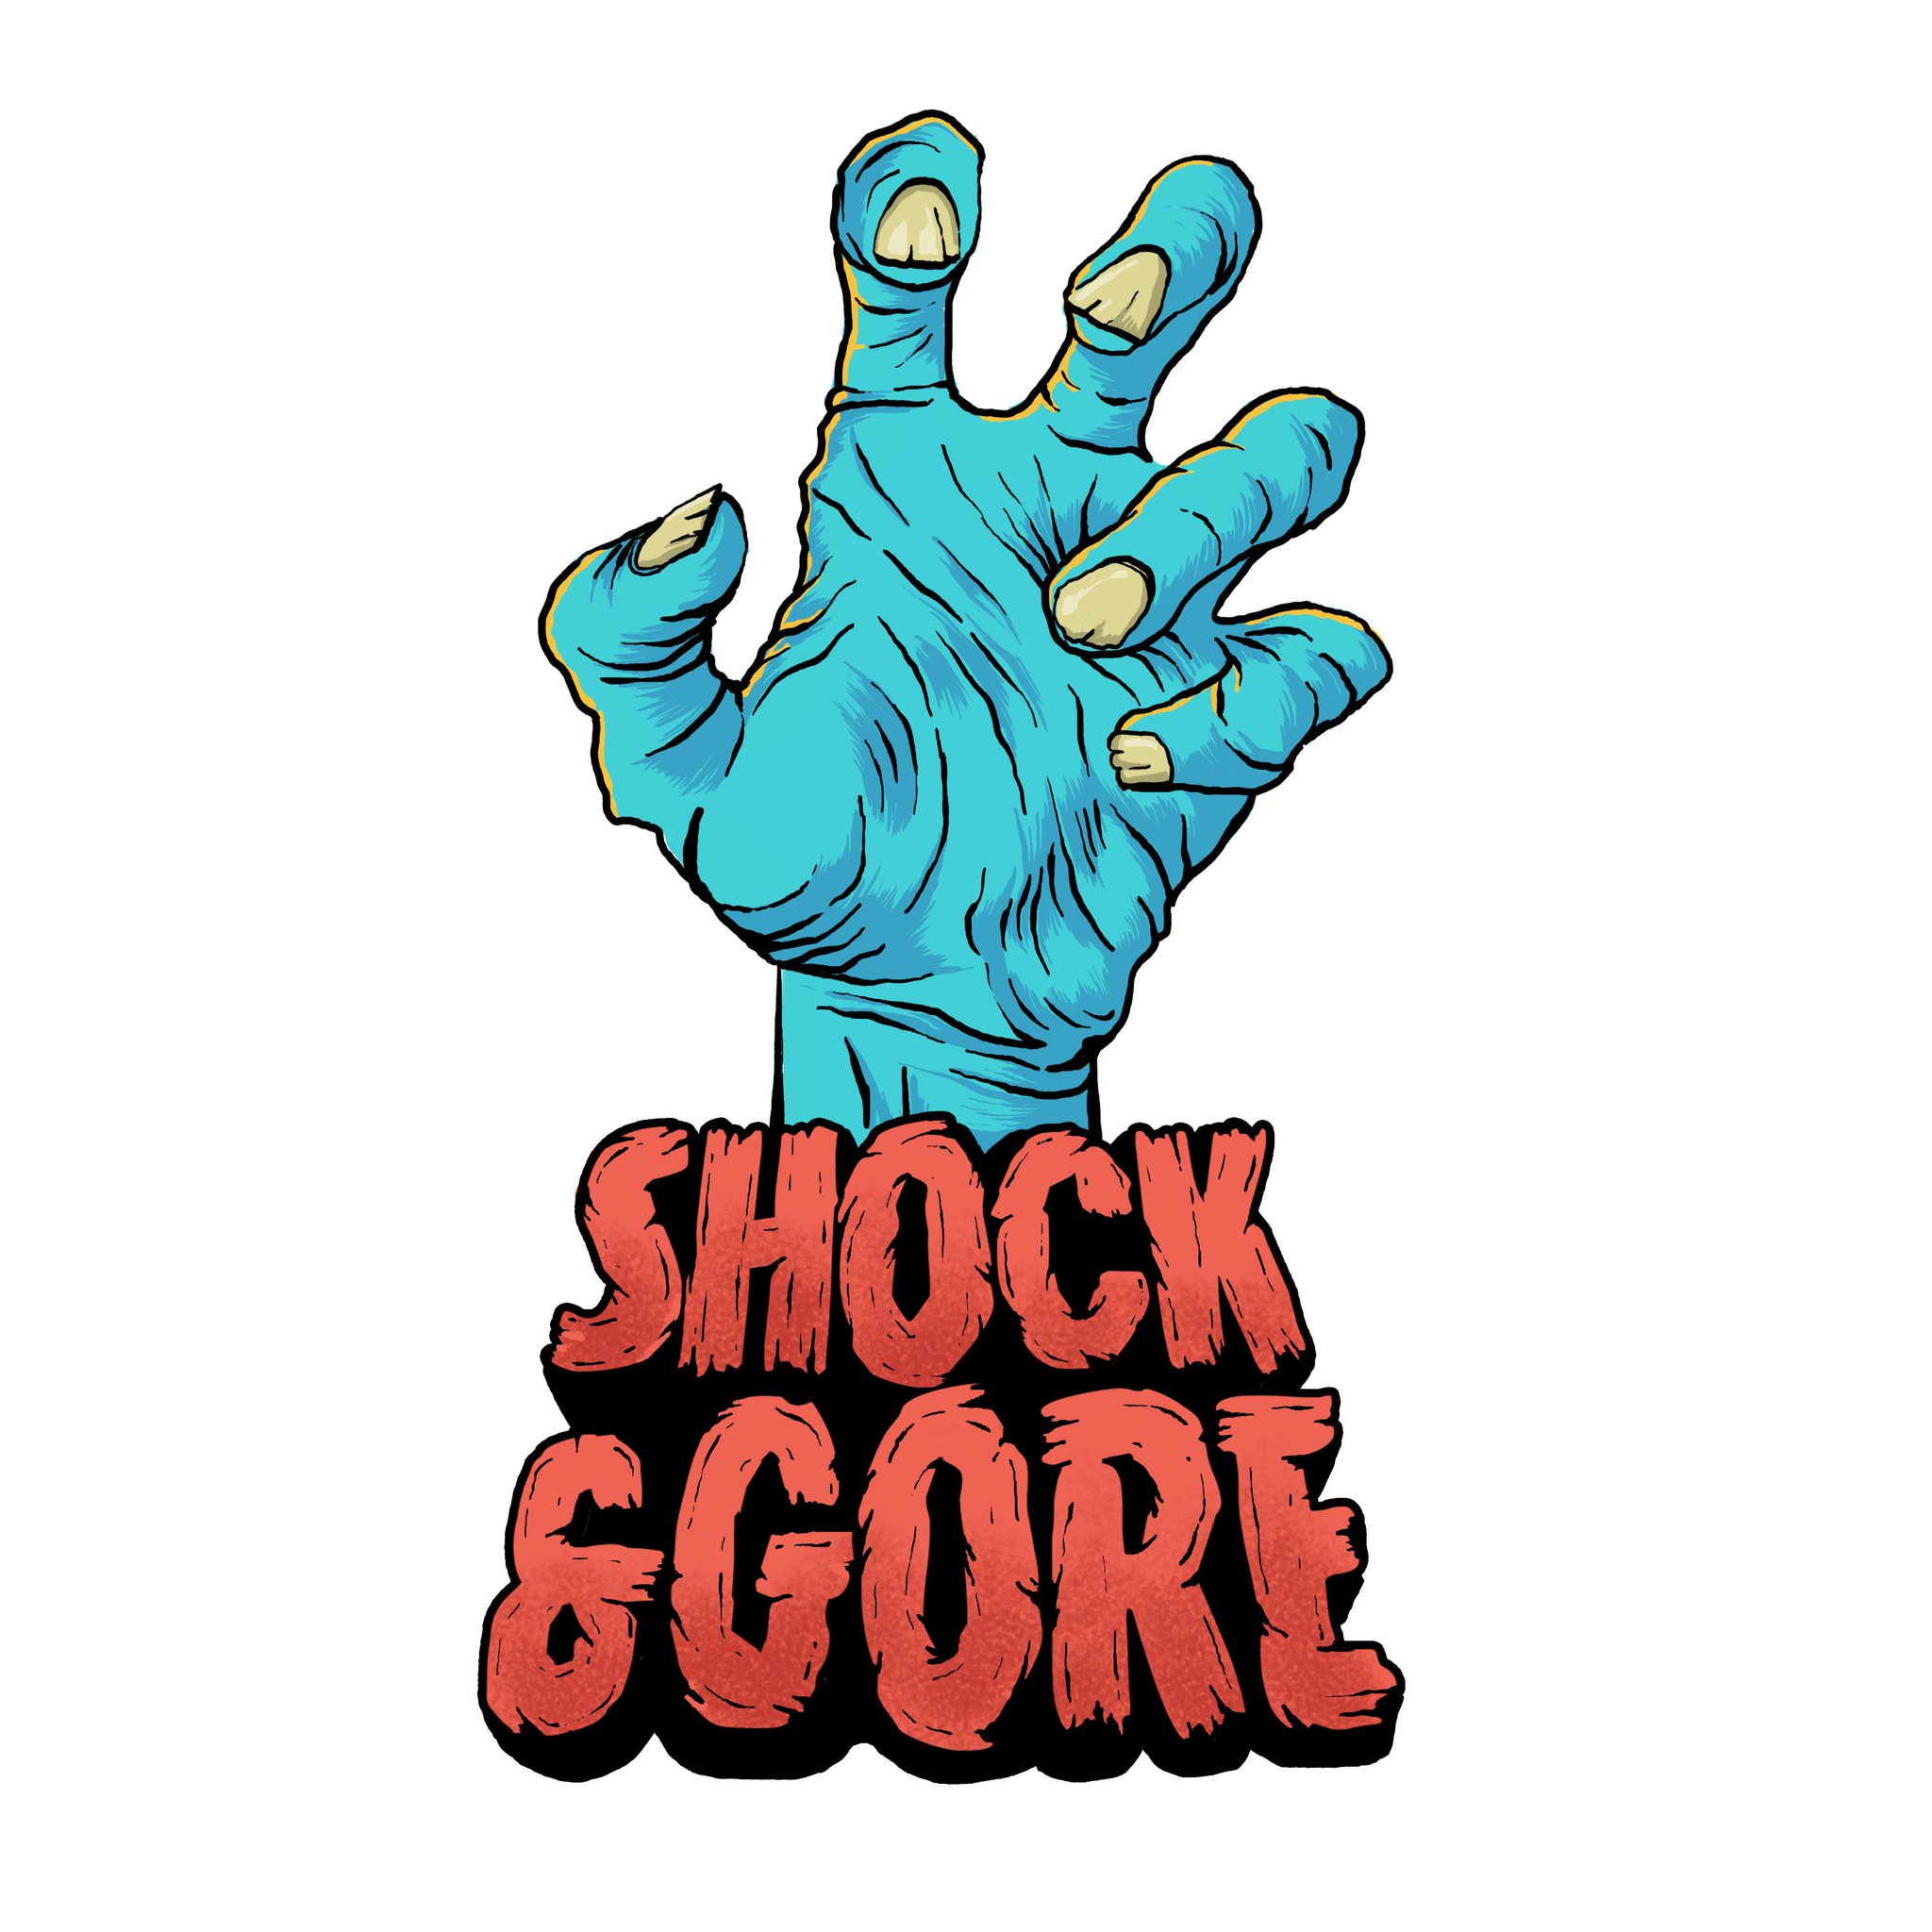 Shock&Gore on Twitter: "Our 2018 festival is now on sale! Cl